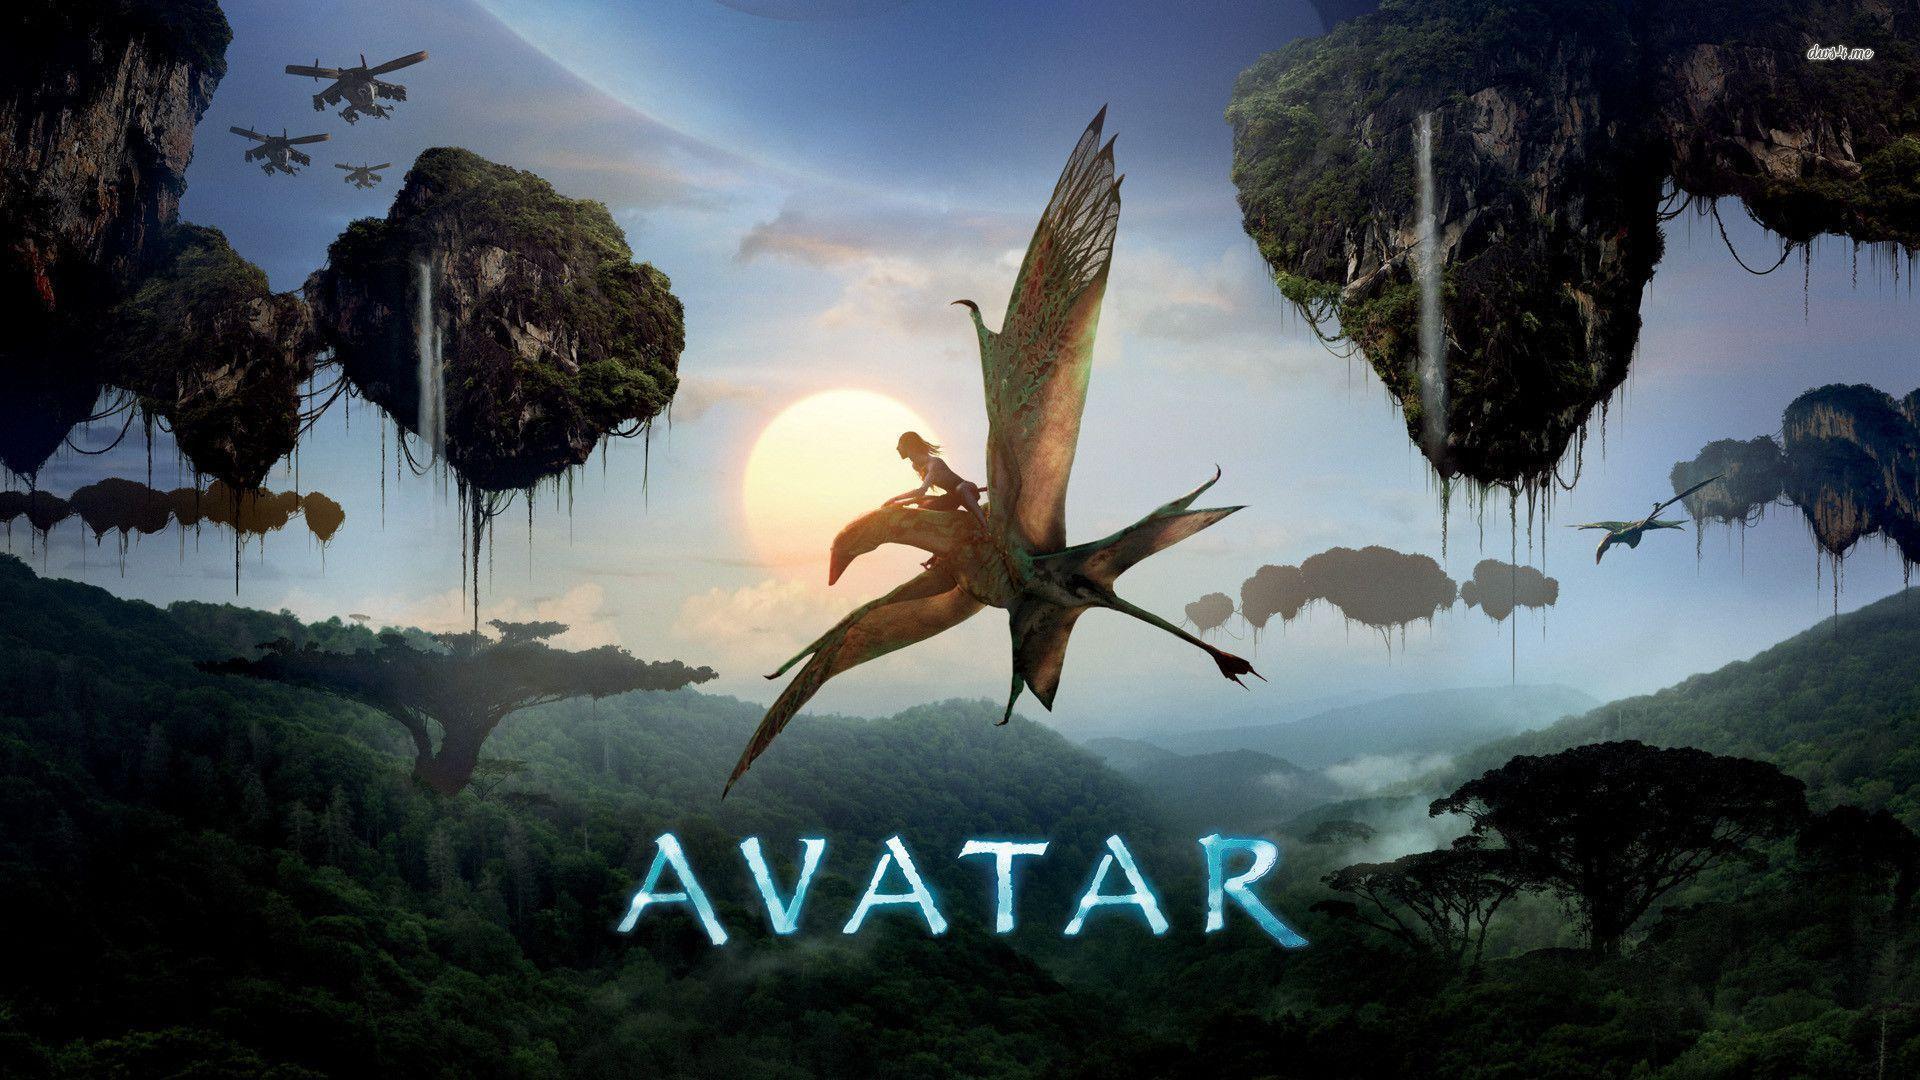 movie review for avatar 2